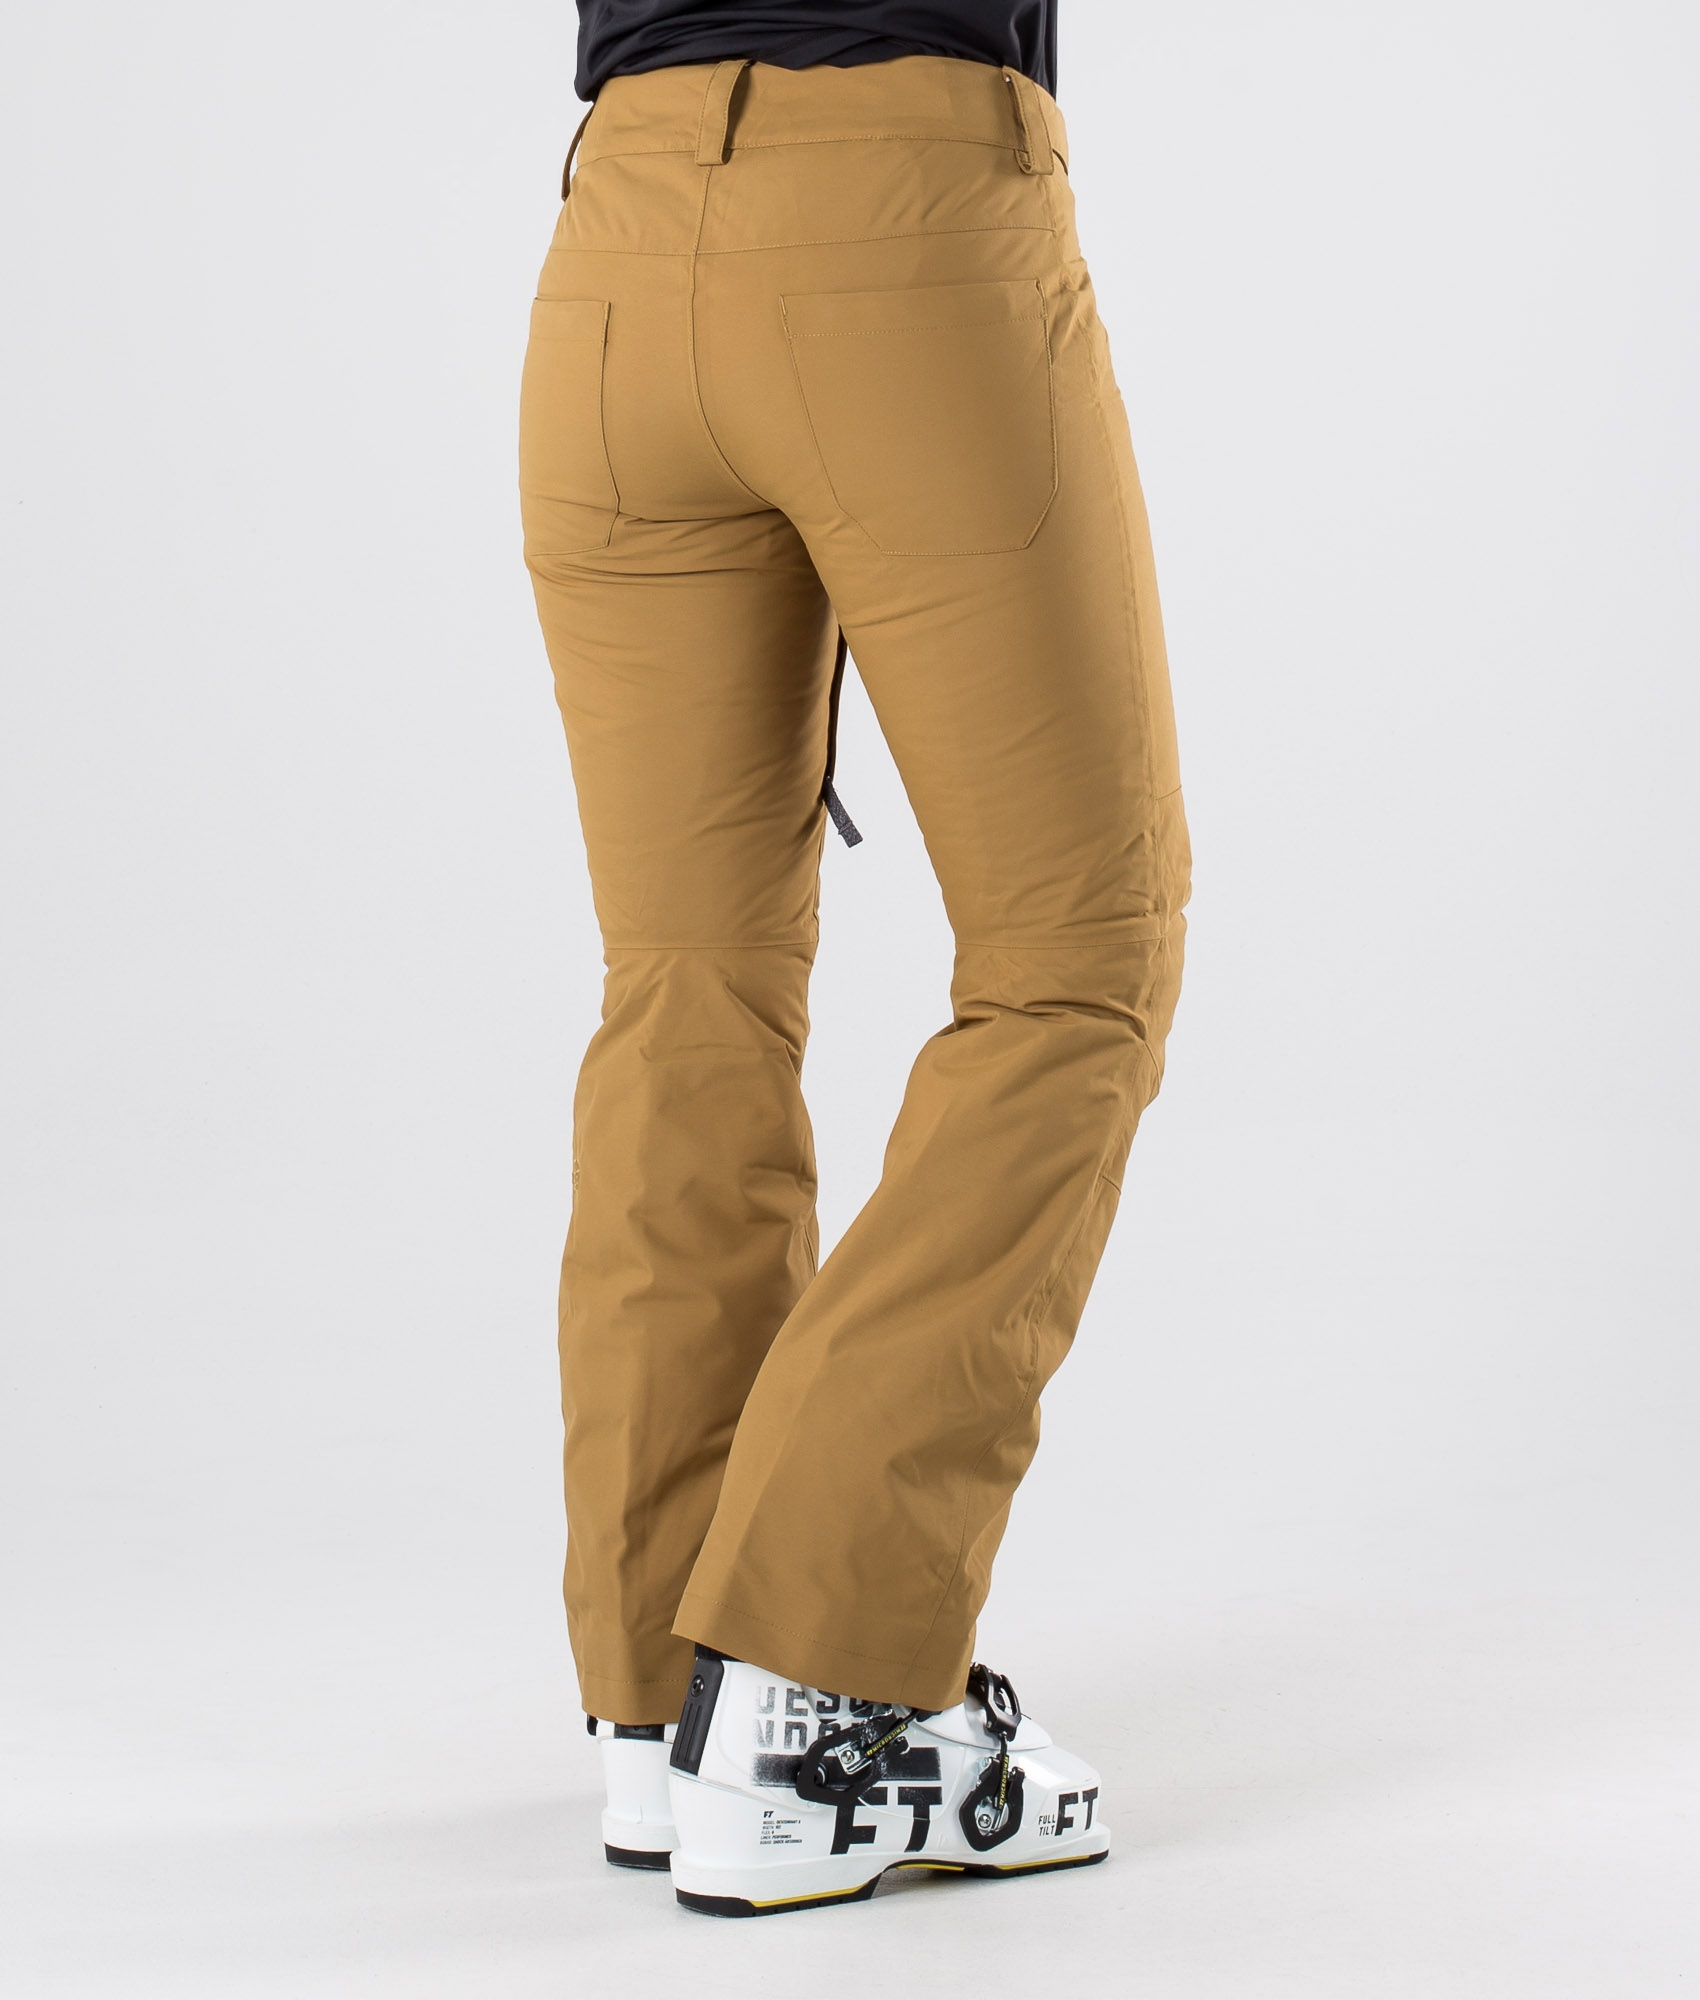 north face women's aboutaday pants